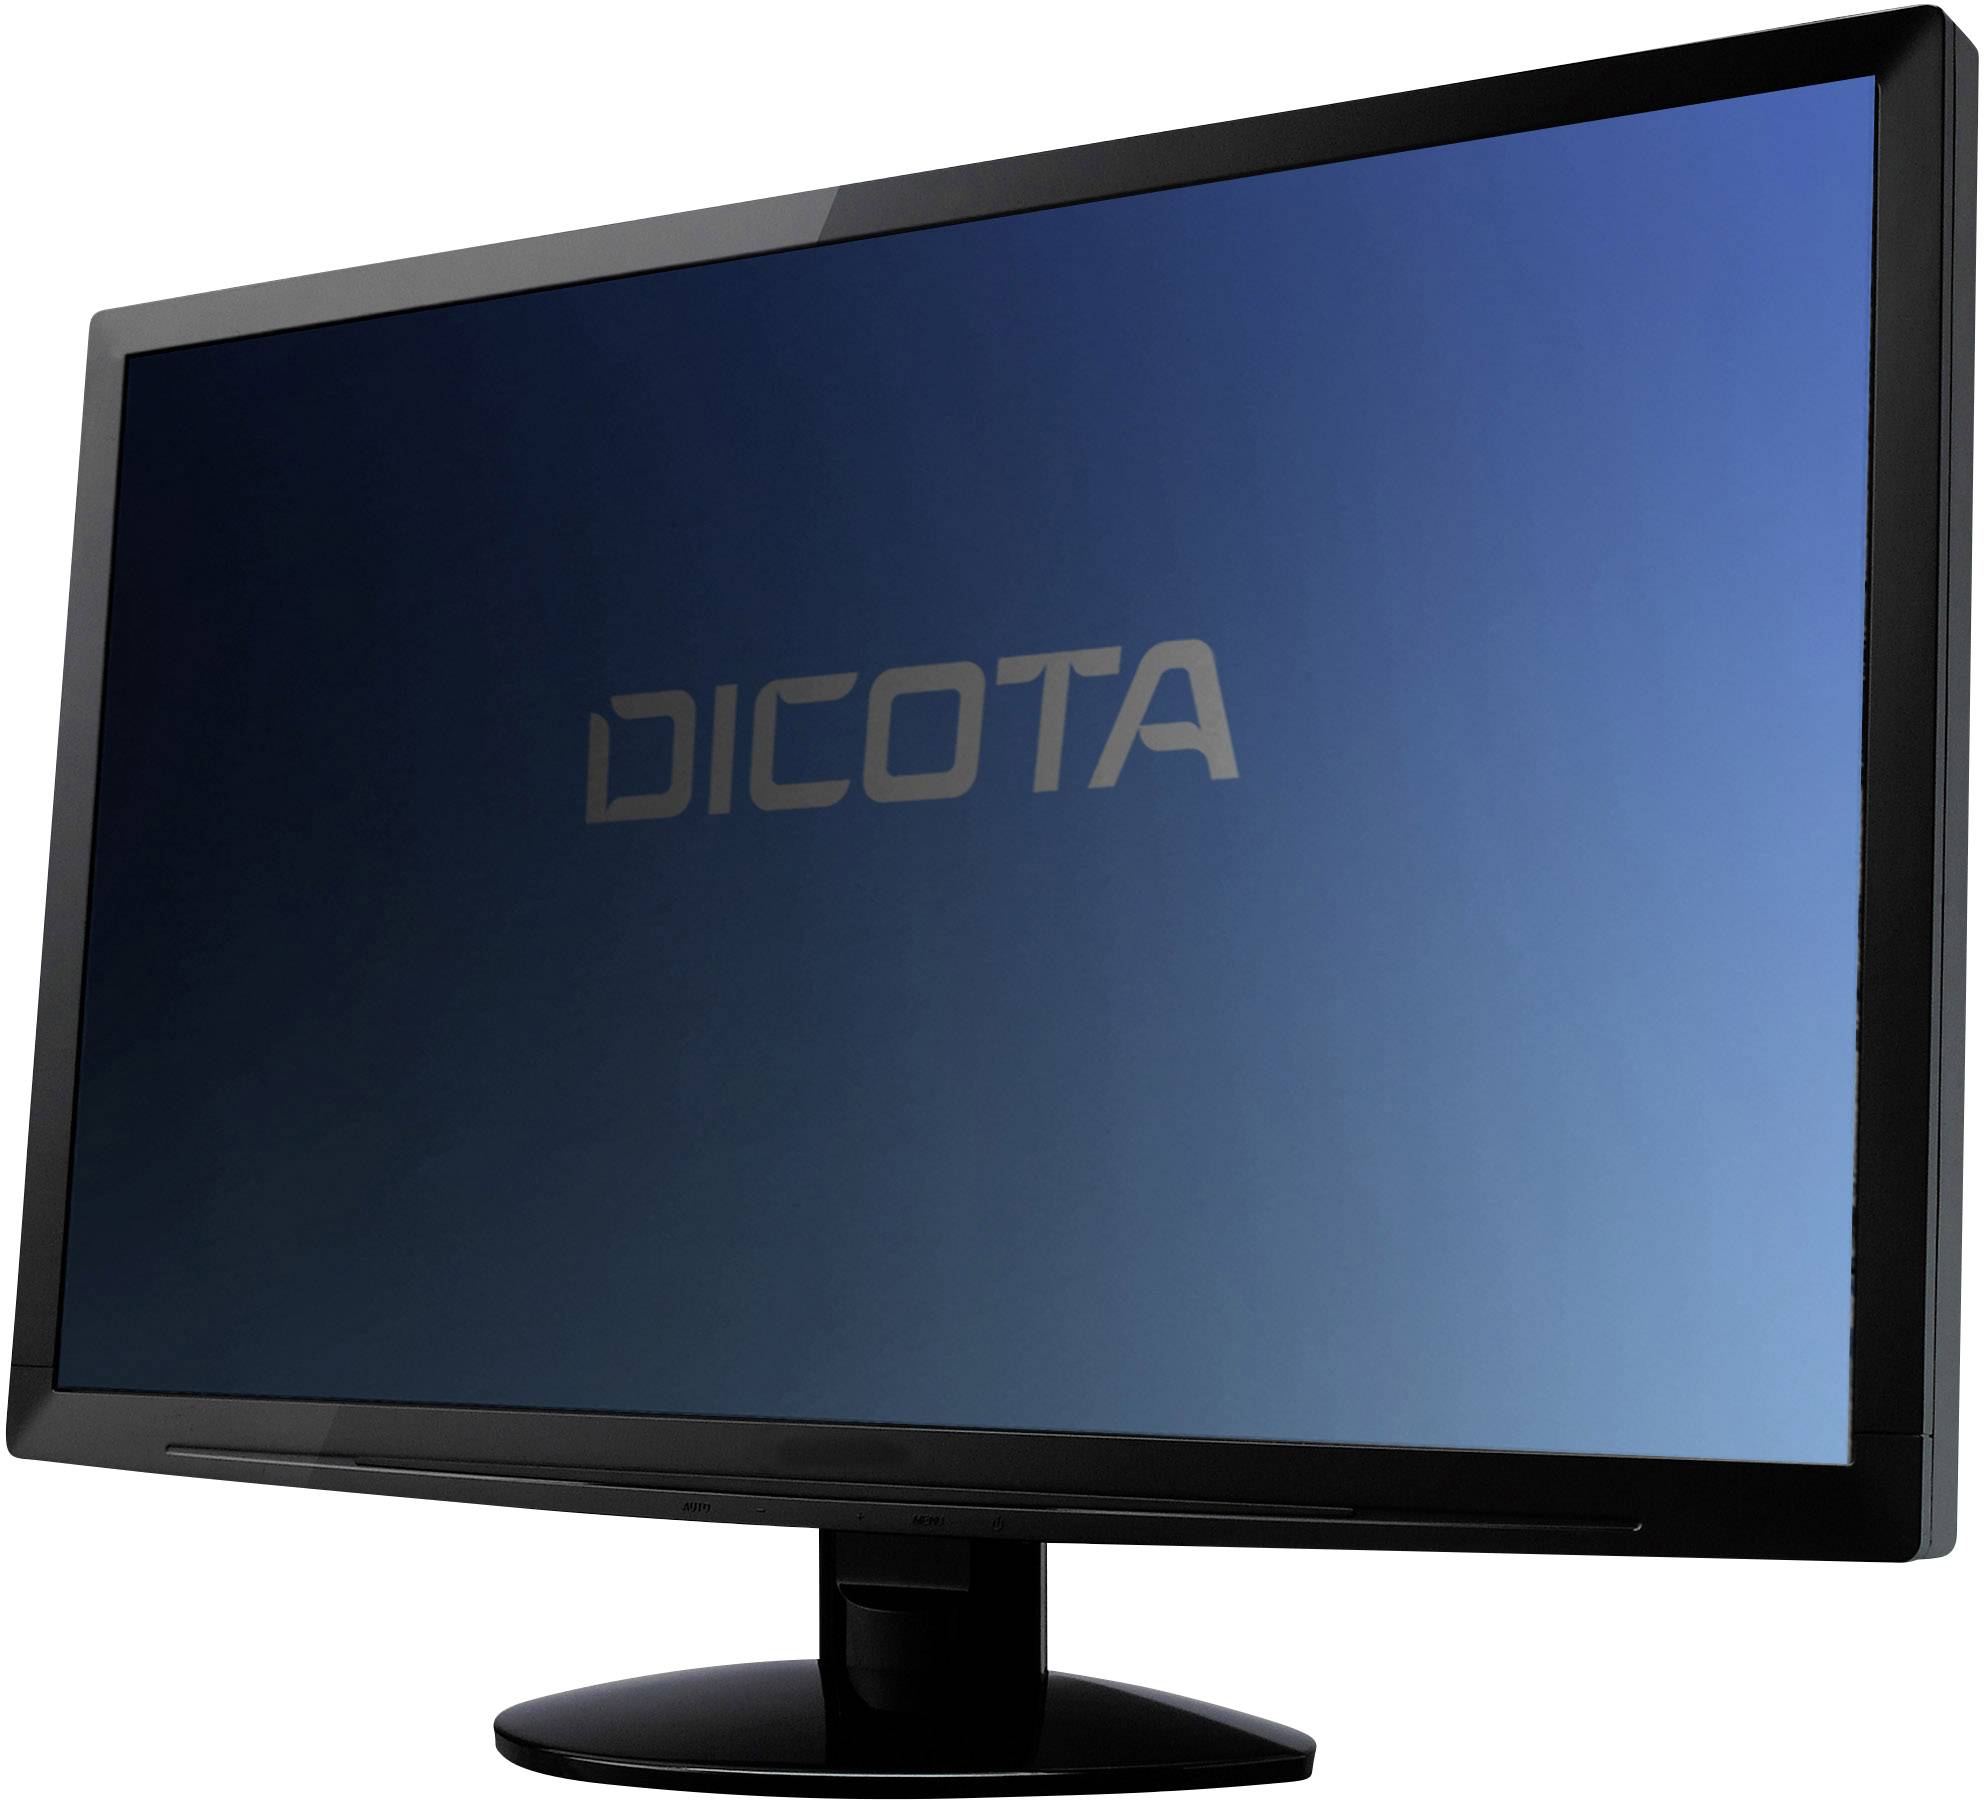 DICOTA Privacy filter 2-Way for Monitor 19.0 (4:3), side-mounted black